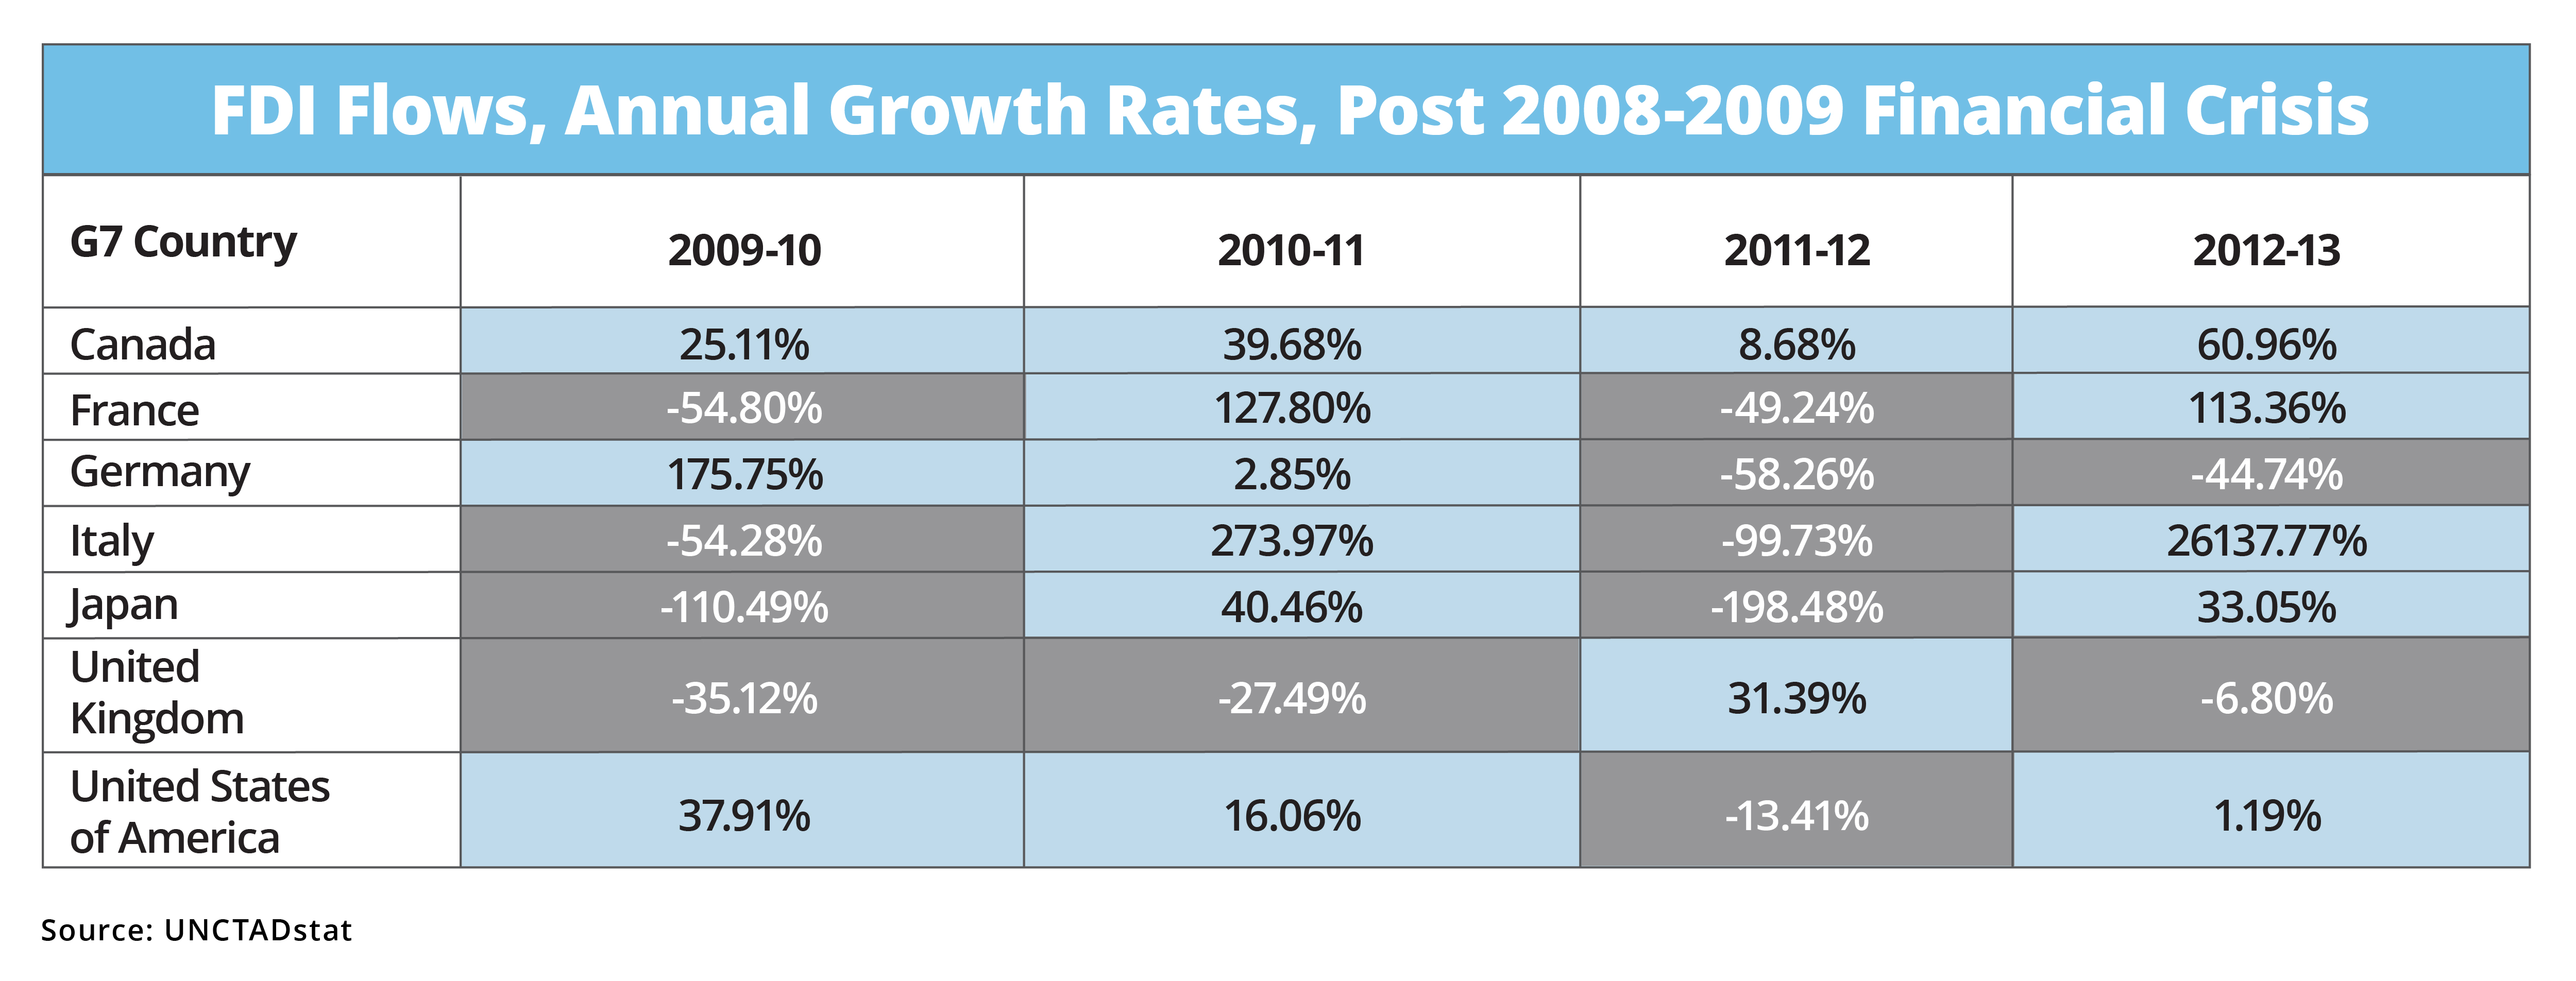 chart showing FDI Flows, Annual Growth Rates, Post 2008-2009 Financial Crisis in G7 countries